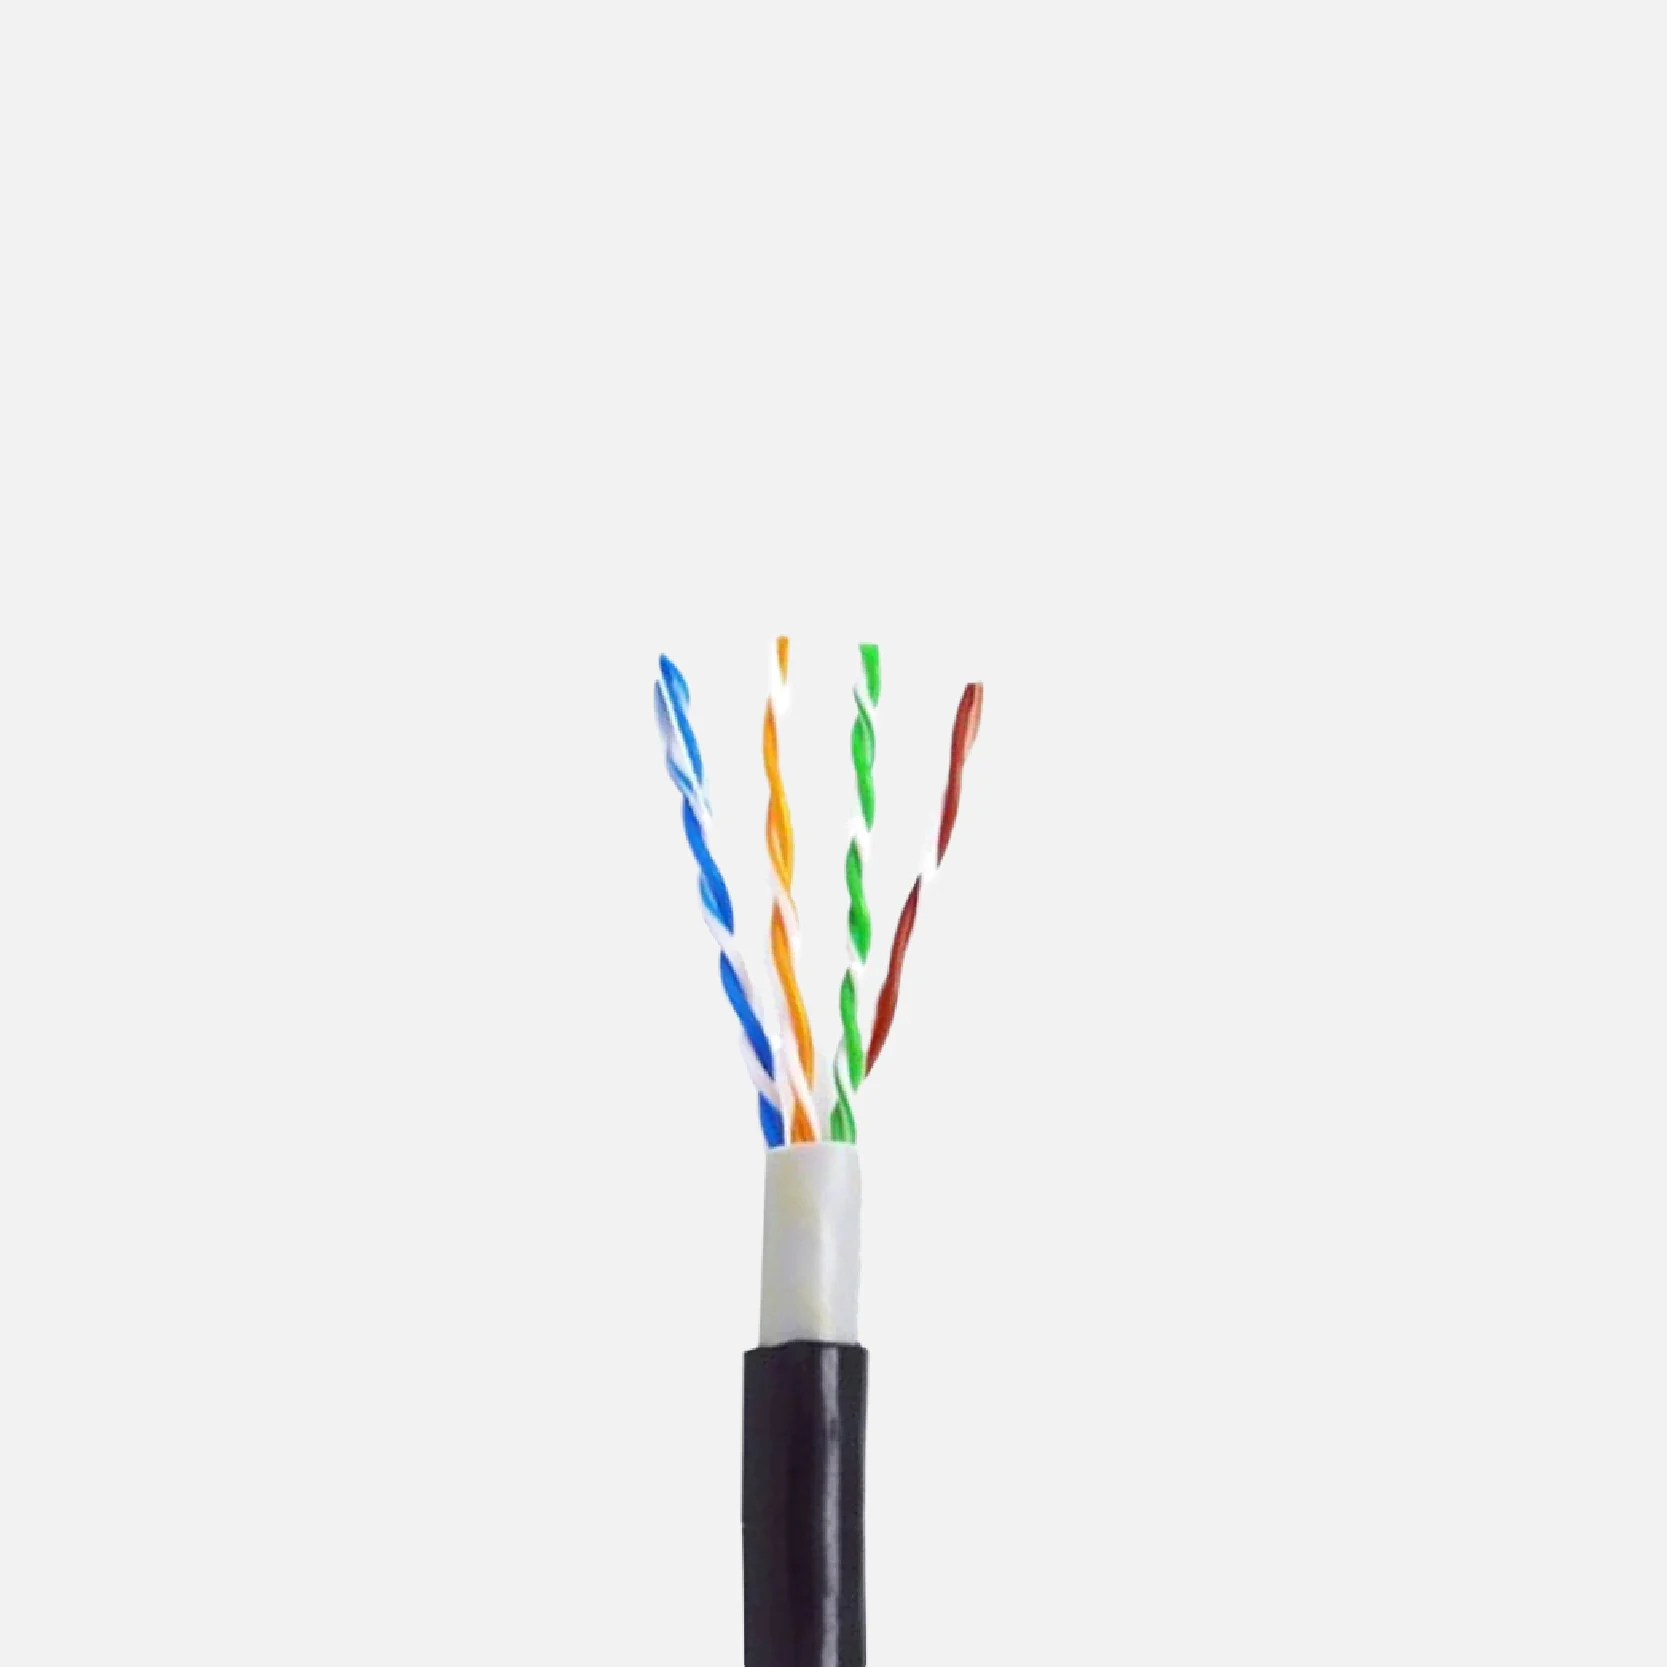 OUTDOOR UTP CAT6 DOUBLE JACKET CABLE 305